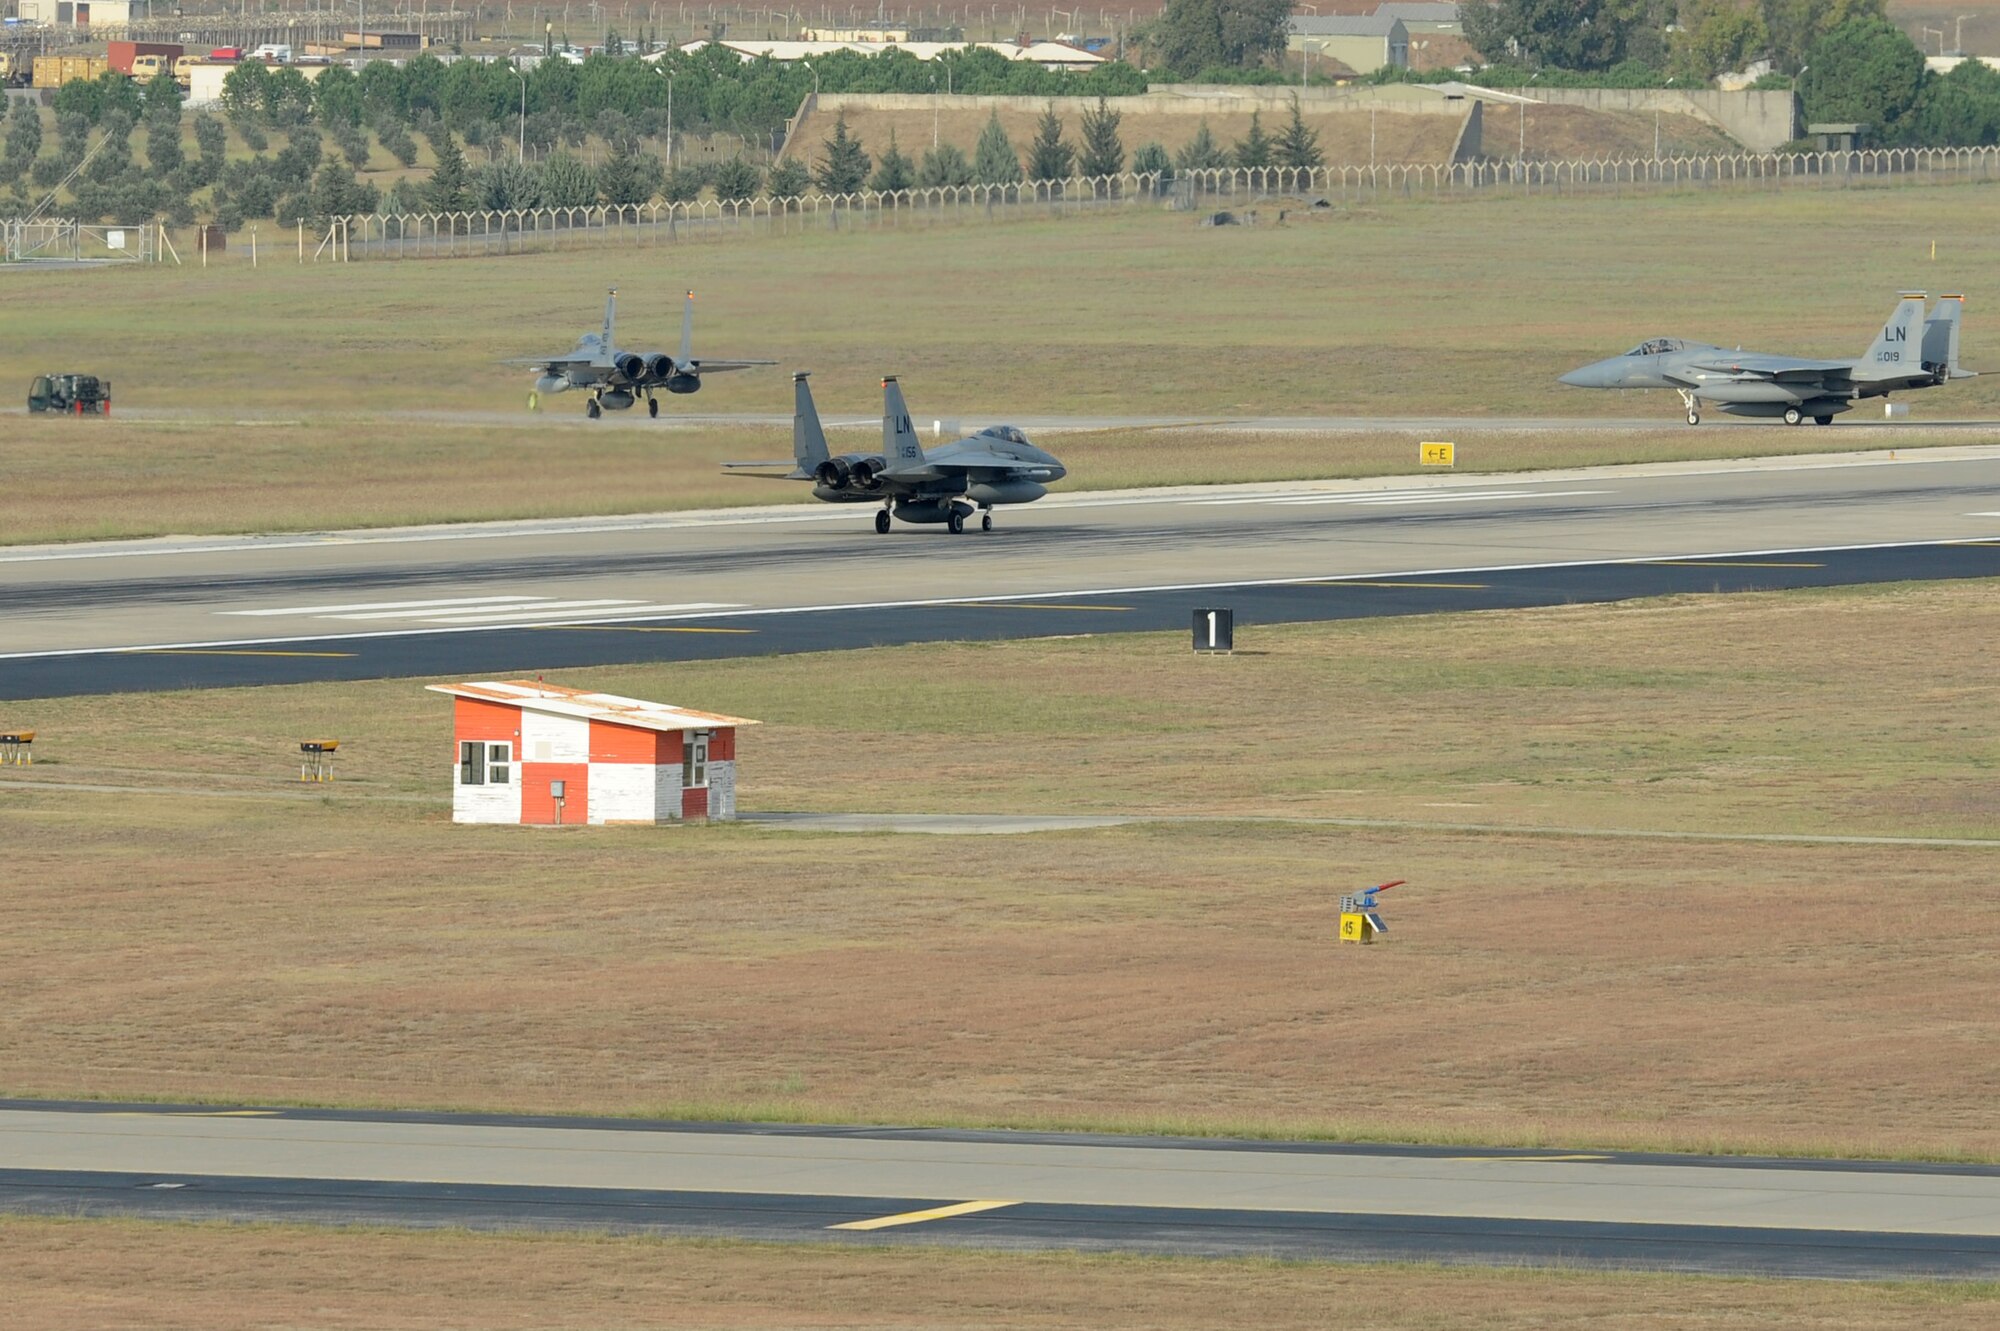 Three F-15C Eagles from the 493rd Fighter Squadron at RAF Lakenheath, UK, taxi the flightline at Incirlik Air Base, Turkey, Nov. 6, 2015. The six F-15Cs are deployed to Incirlik to conduct combat air patrols in Turkish air space. (U.S. Air Force photo by Tech. Sgt. Taylor Worley/Released)